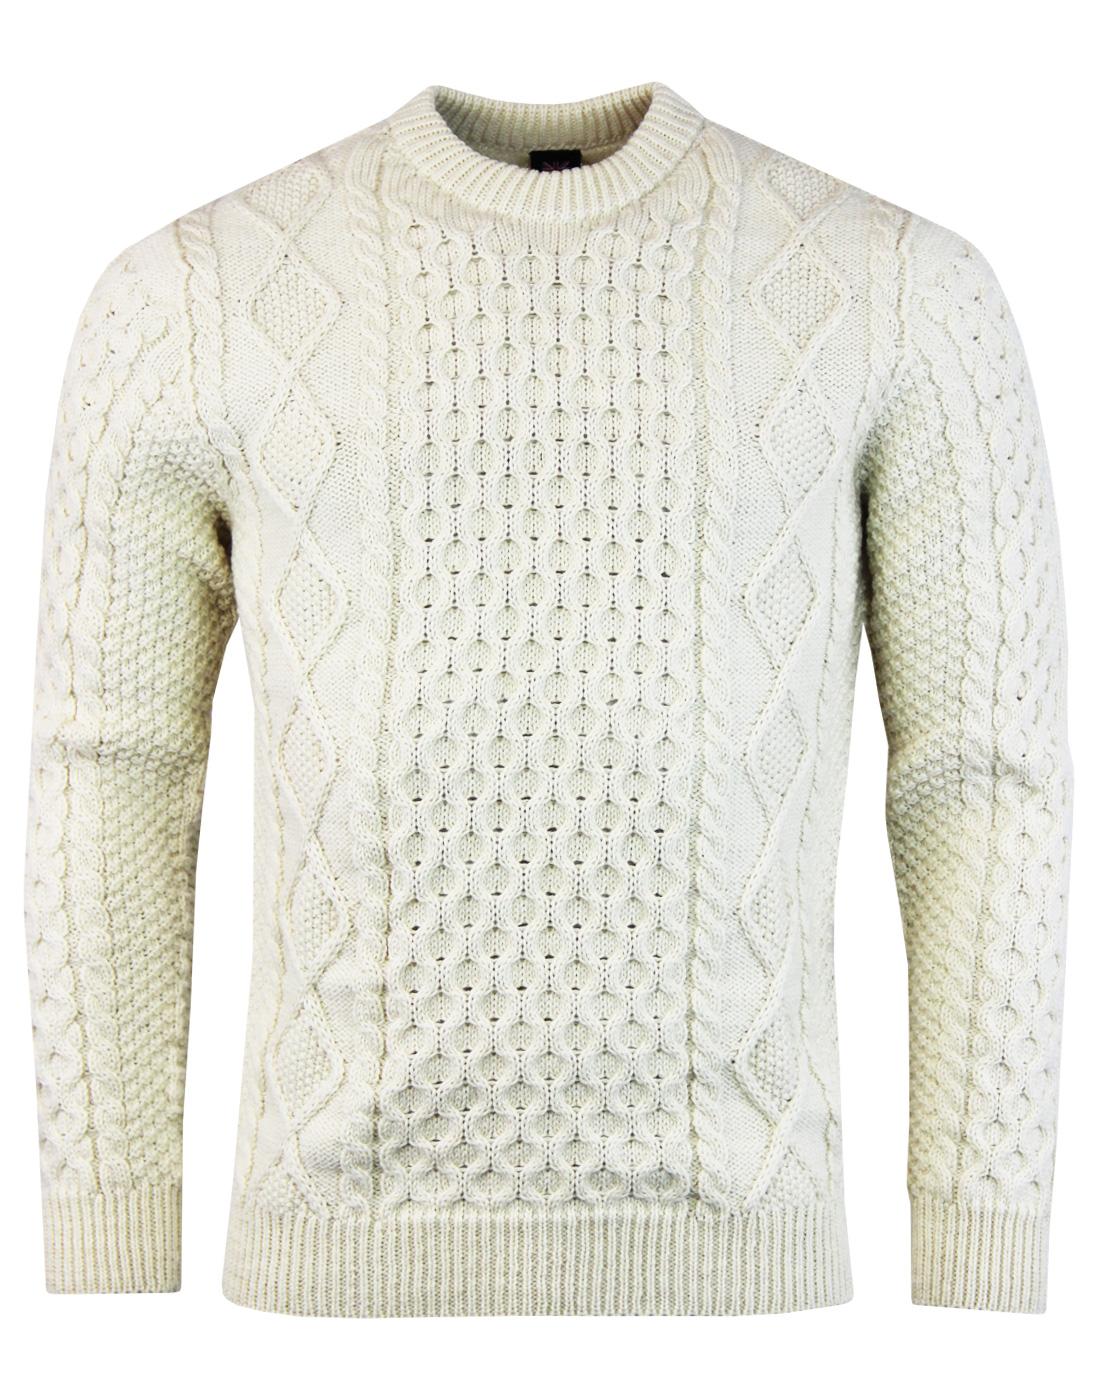 GLOVERALL Aran Made in England Merino Wool Cable Knit Jumper Ecru